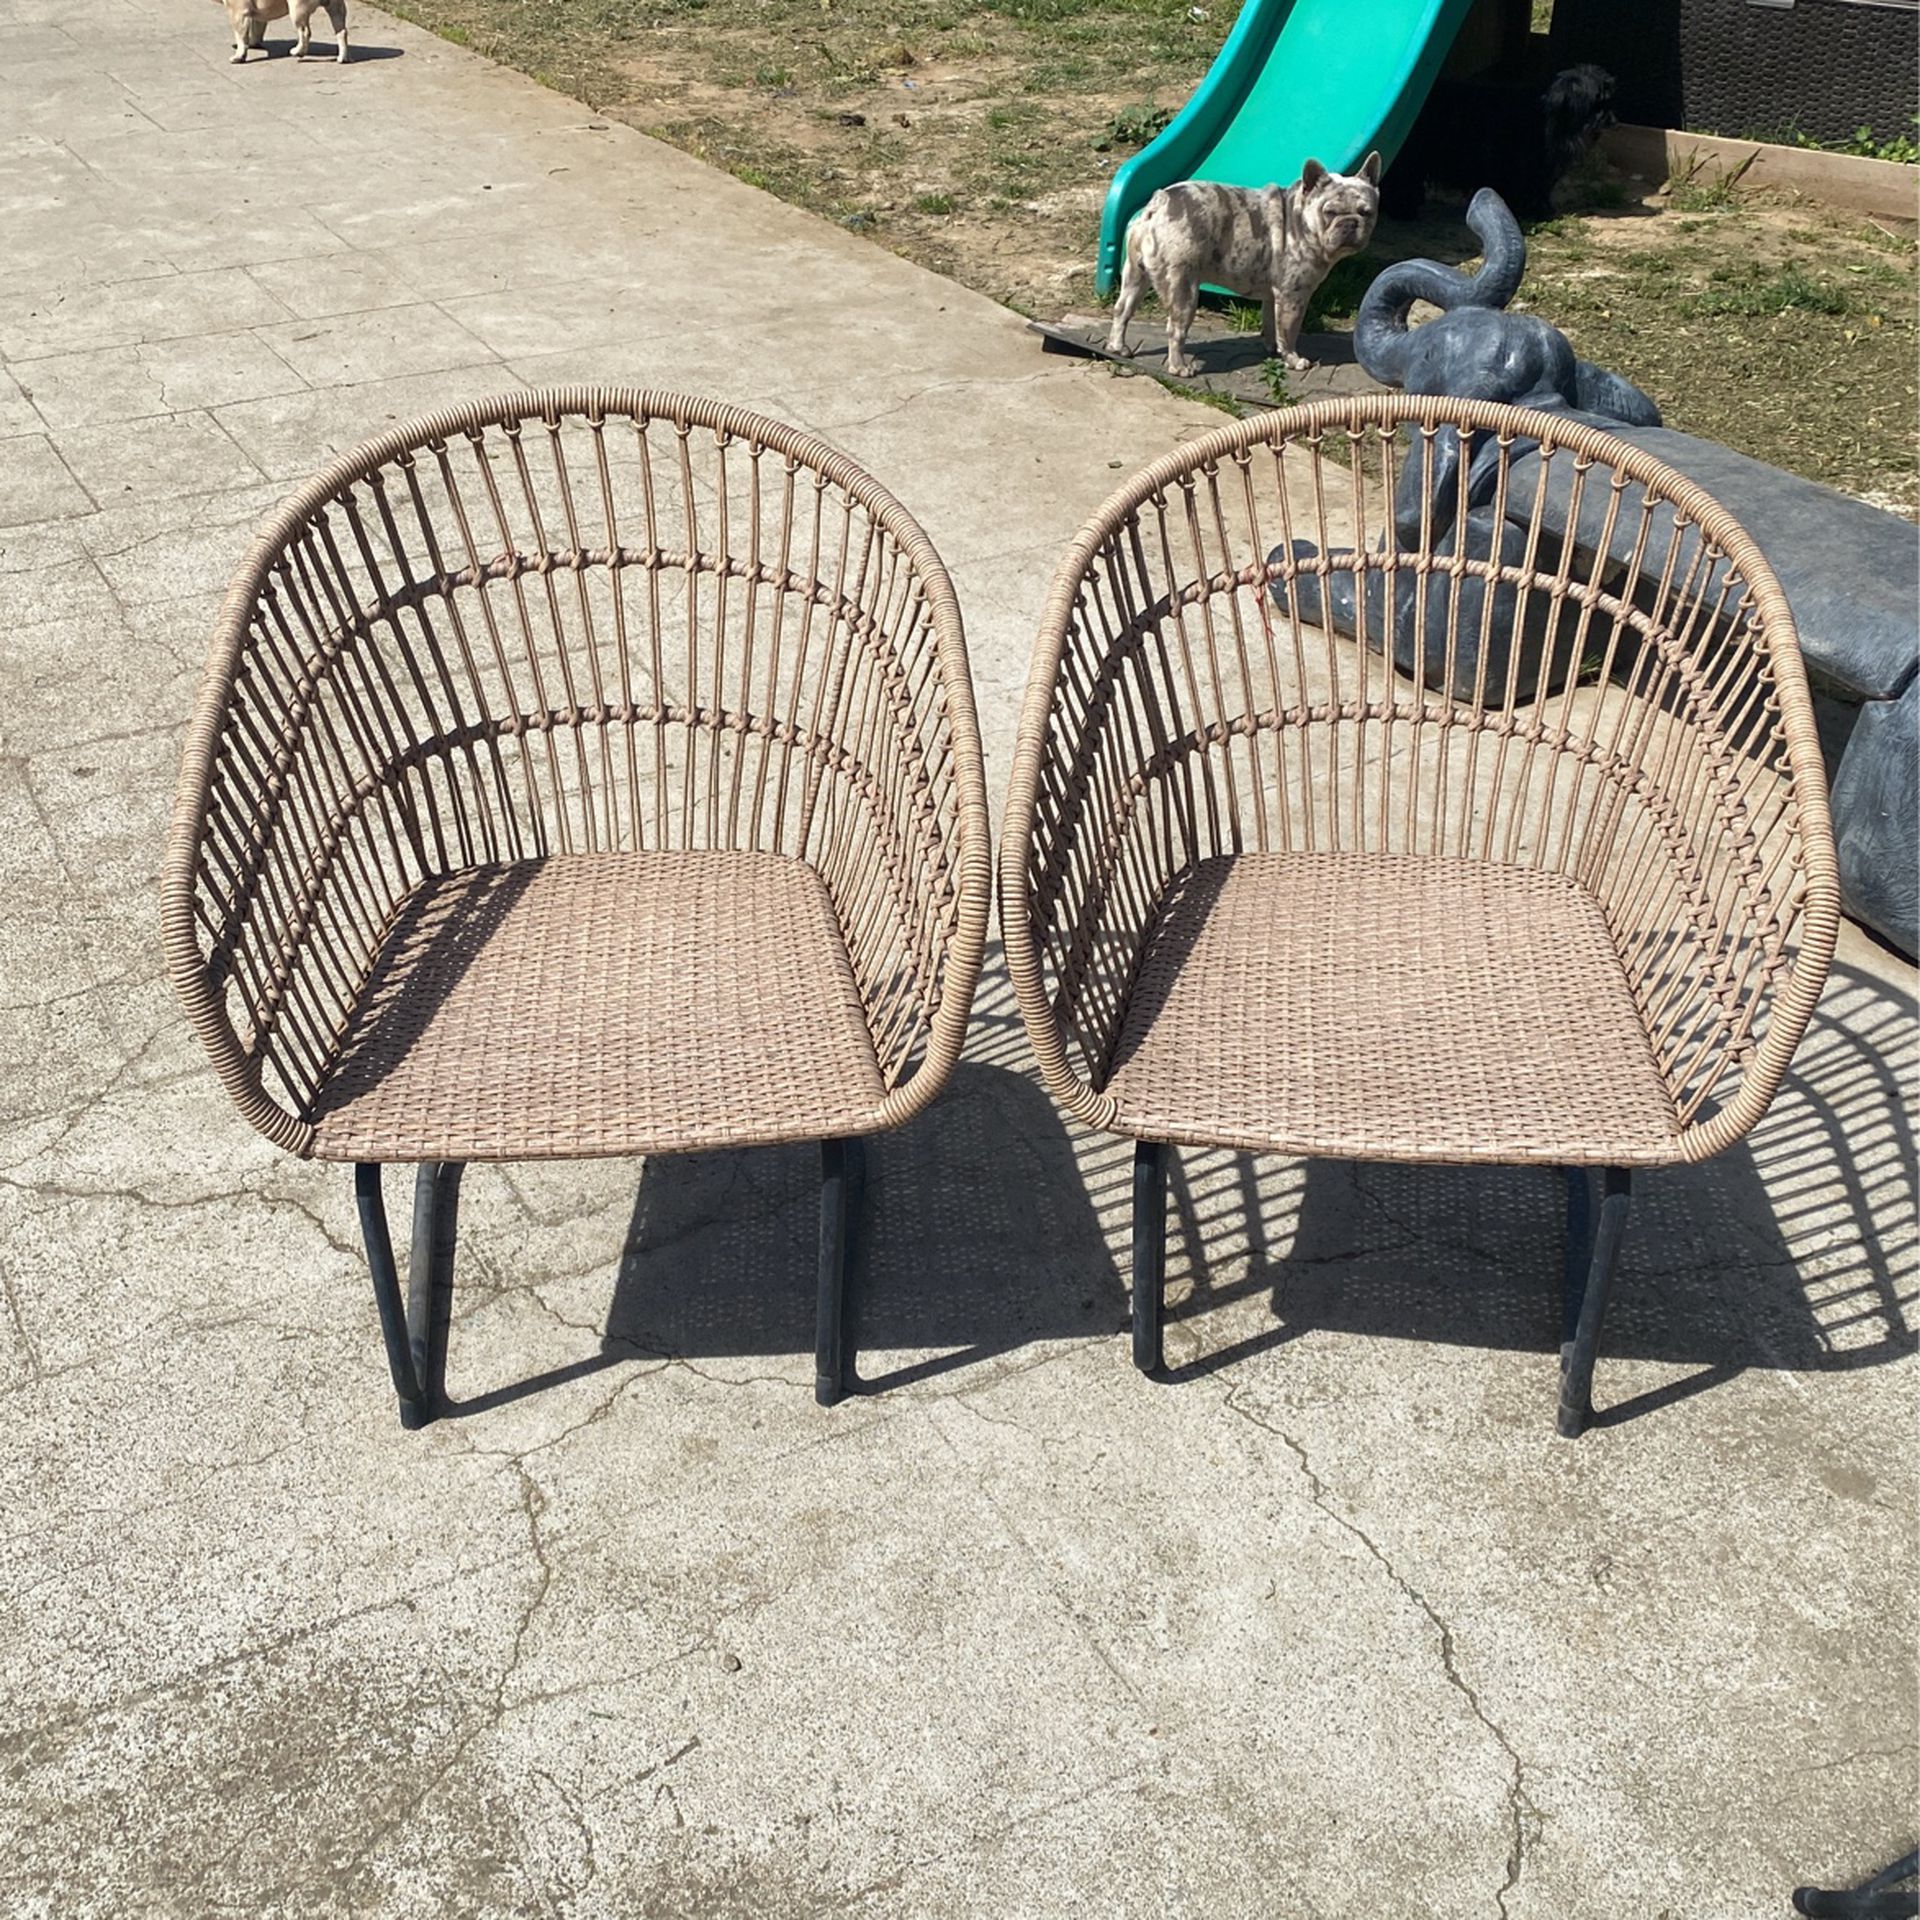 Antique Wicker Chairs Made Out Of Metal On The Bottom